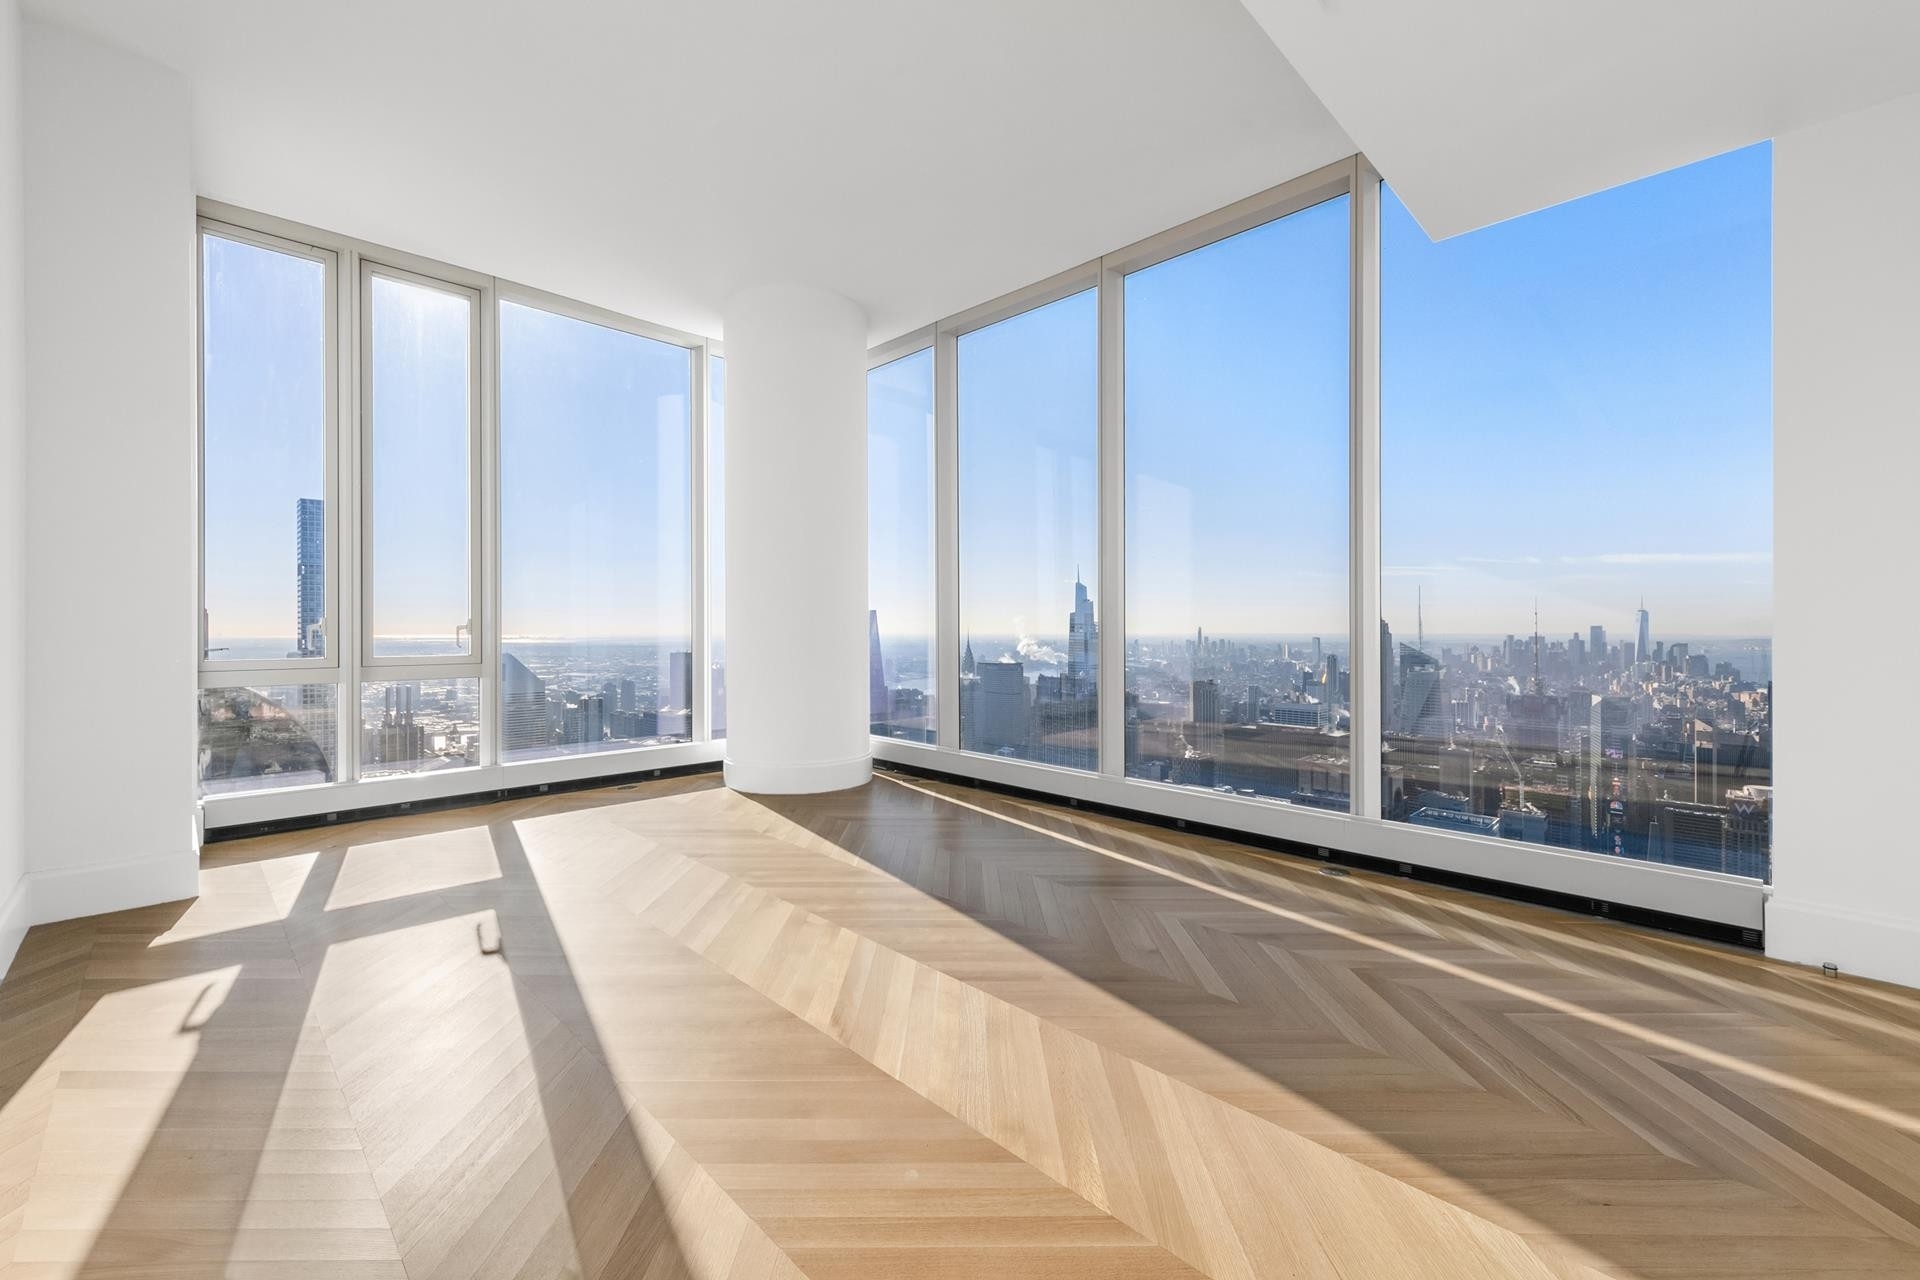 4. Condominiums for Sale at Central Park Tower, 217 W 57TH ST, 97E Midtown West, New York, NY 10019